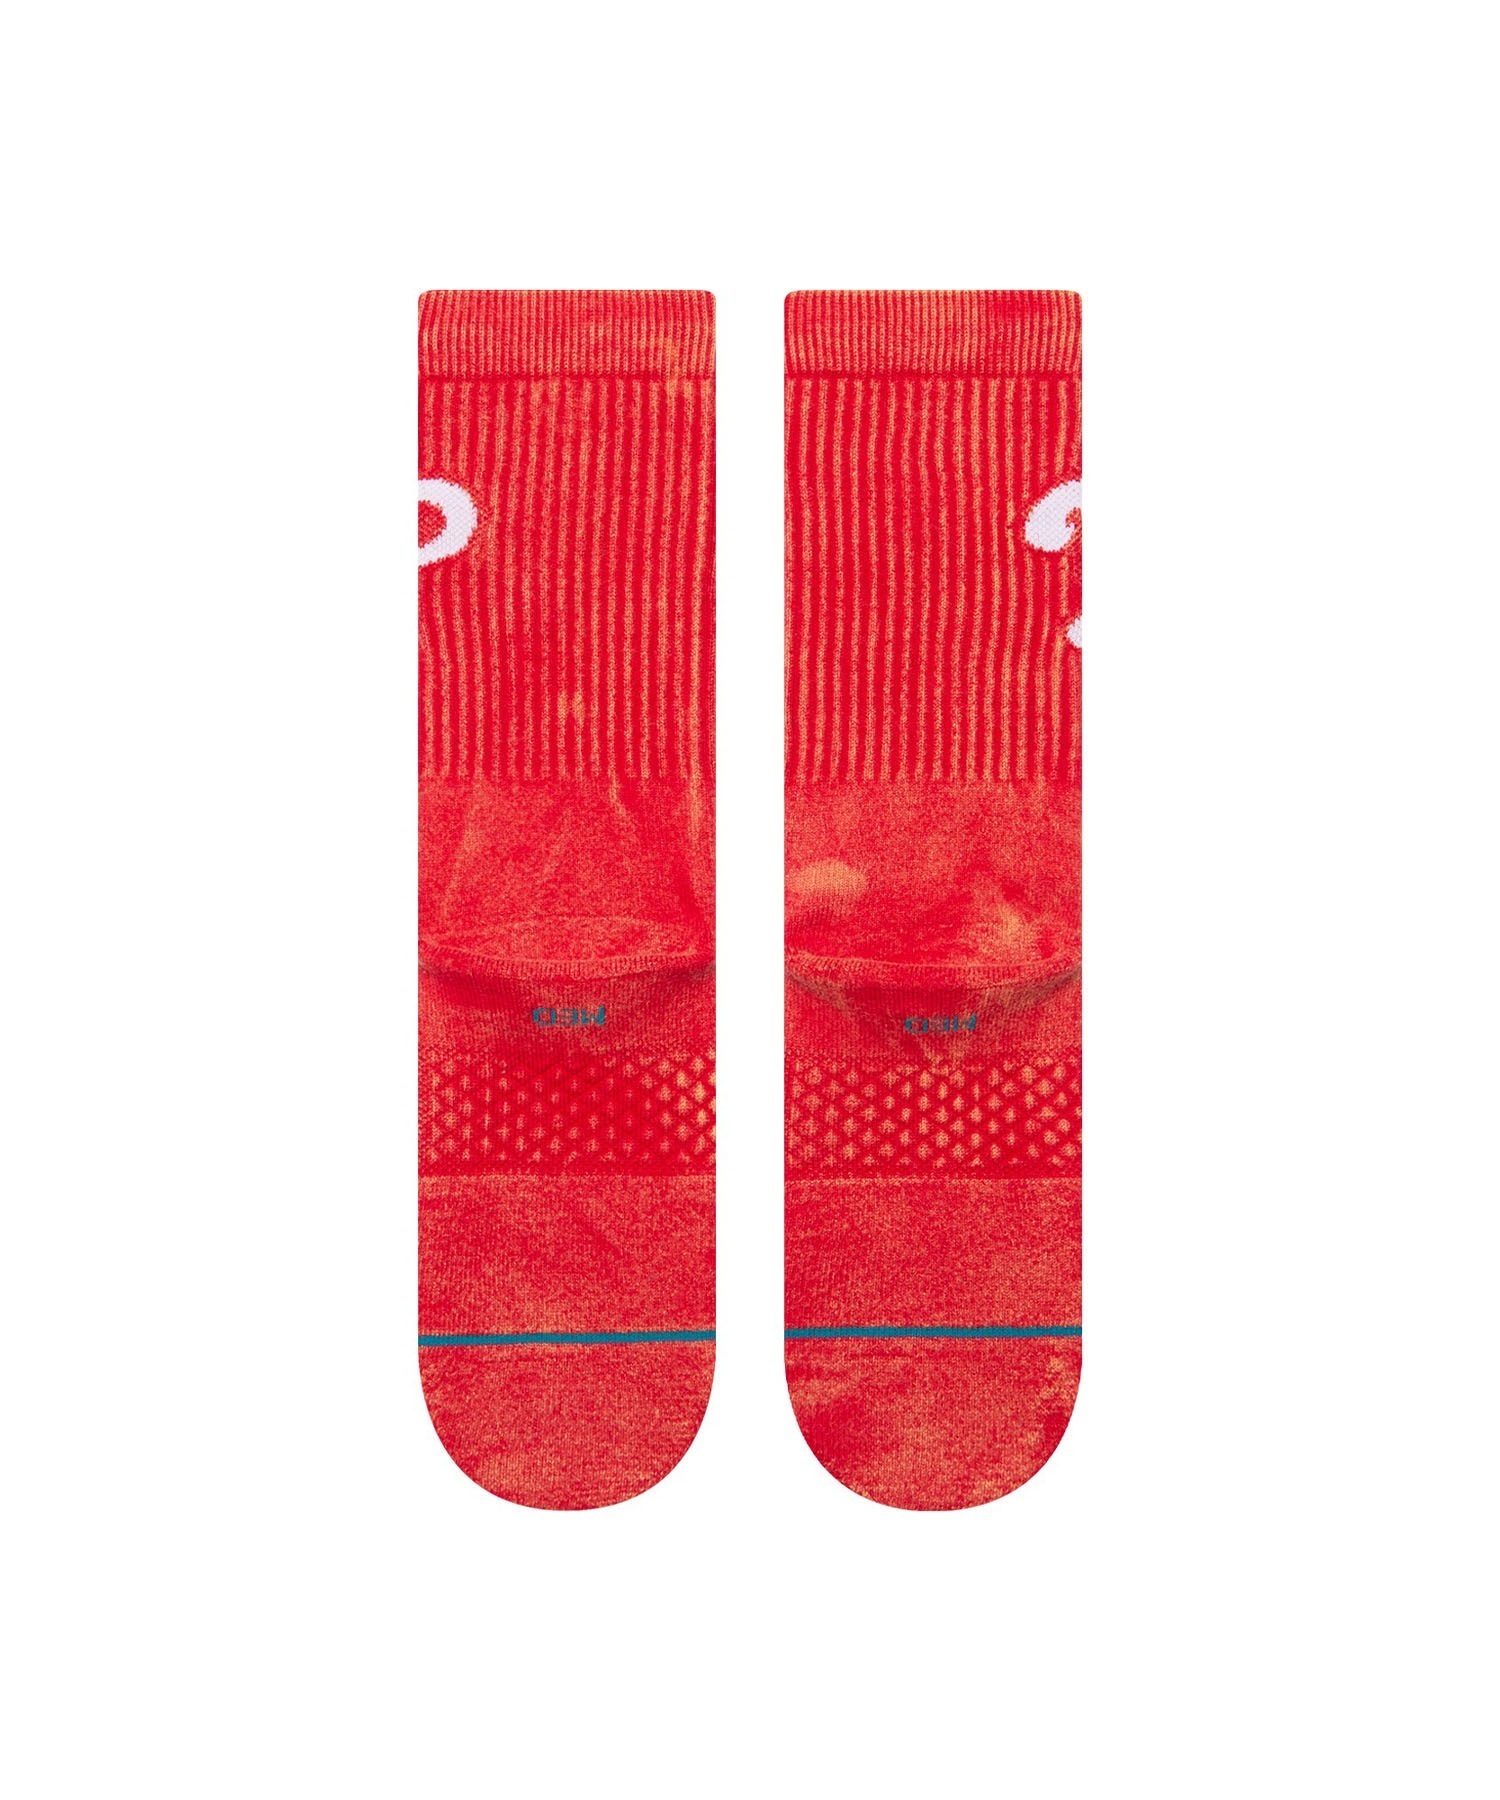 STANCE スタンス ソックス 靴下 FADE PHI A556A24FPH(RED-L)